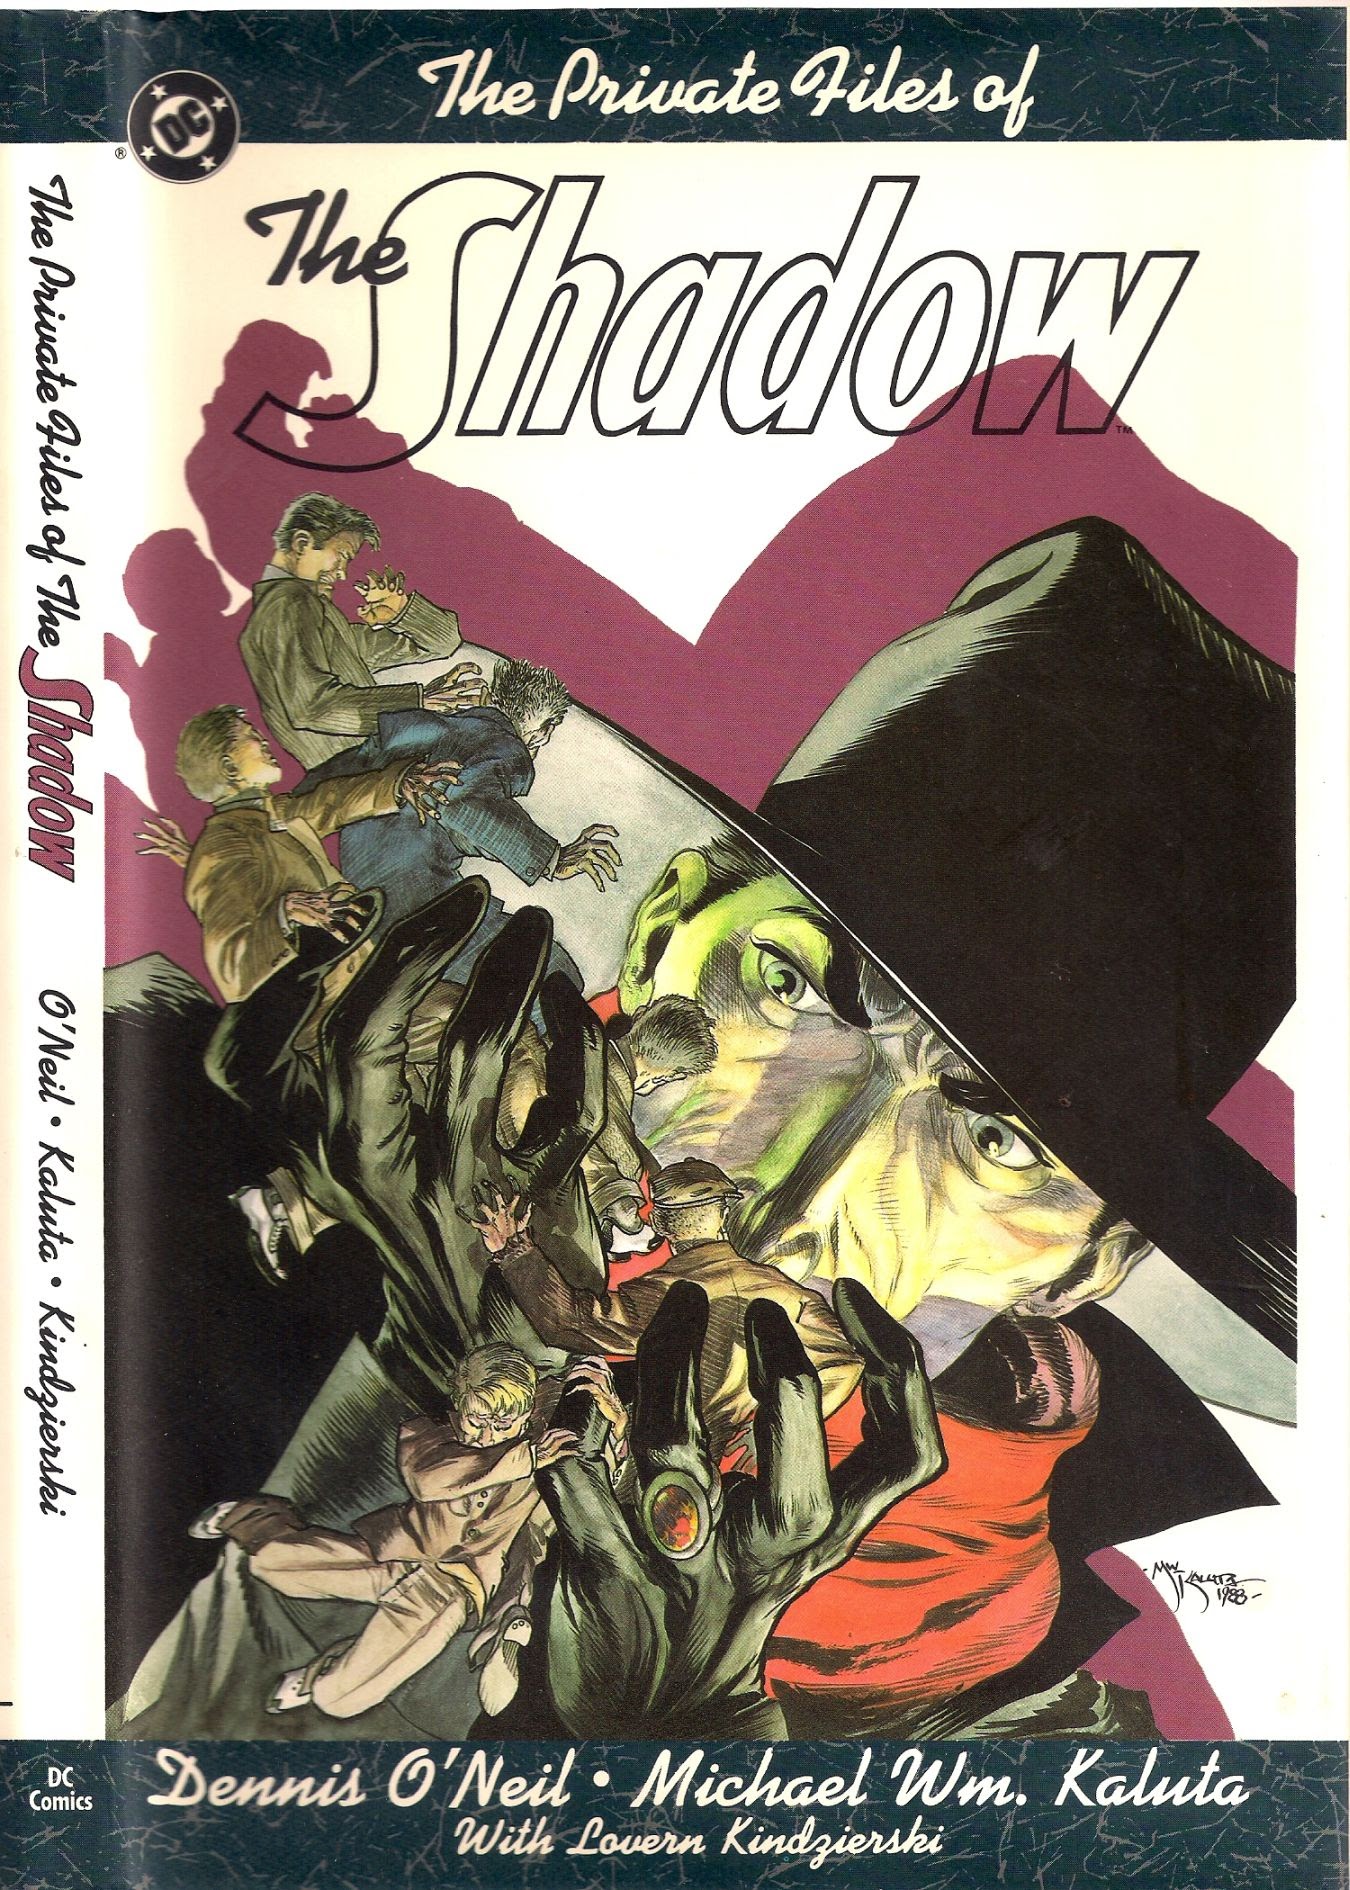 Read online The Private Files of the Shadow comic -  Issue # Full - 1